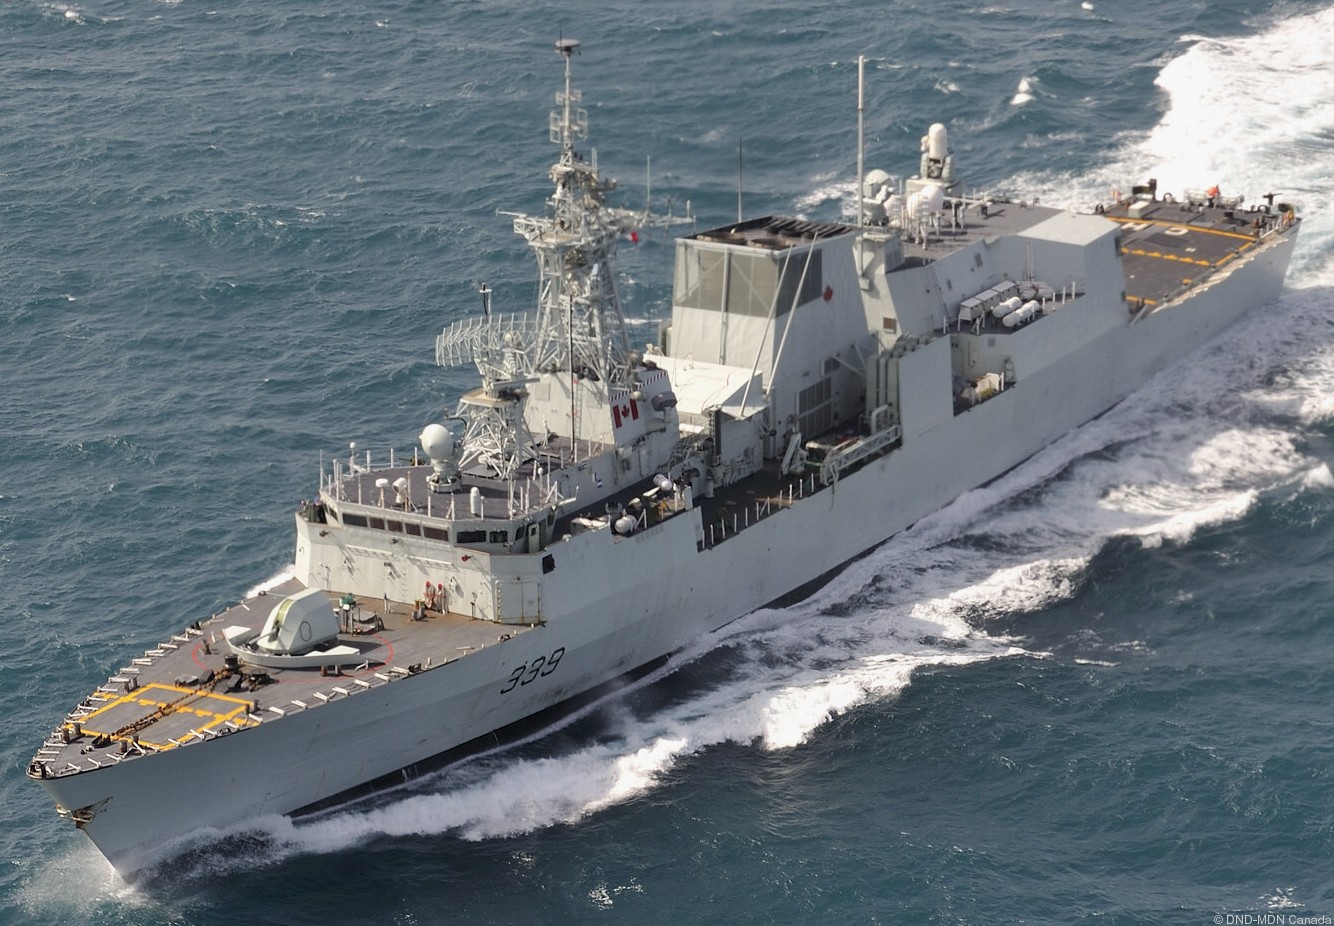 ffh-339 hmcs charlottetown halifax class helicopter patrol frigate ncsm royal canadian navy 38